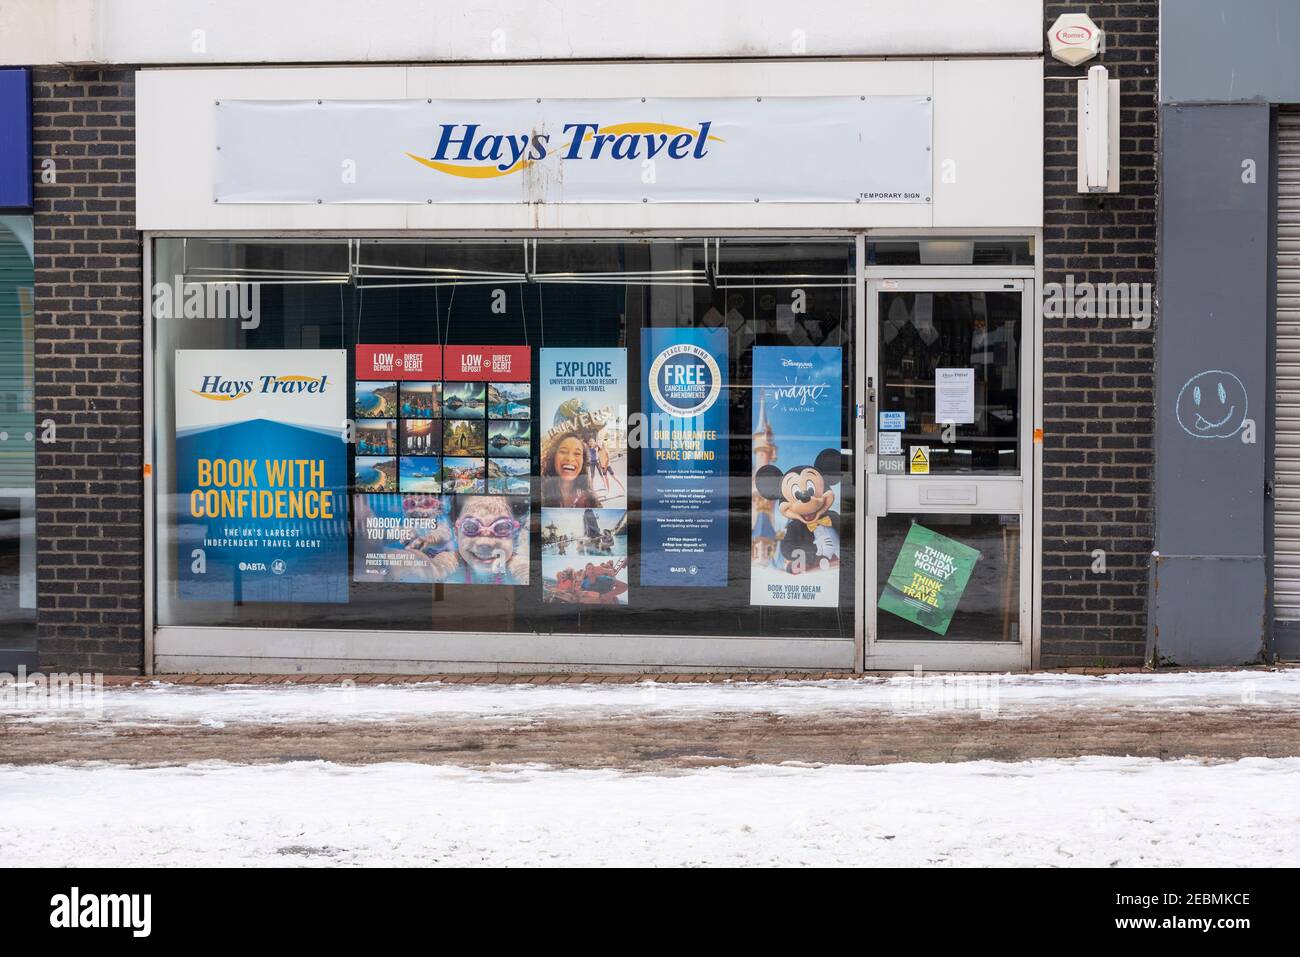 Hays Travel shop in High Street in Southend on Sea, Essex, UK, with snow on the ground from Storm Darcy, during COVID 19 lockdown. Grim. Stock Photo